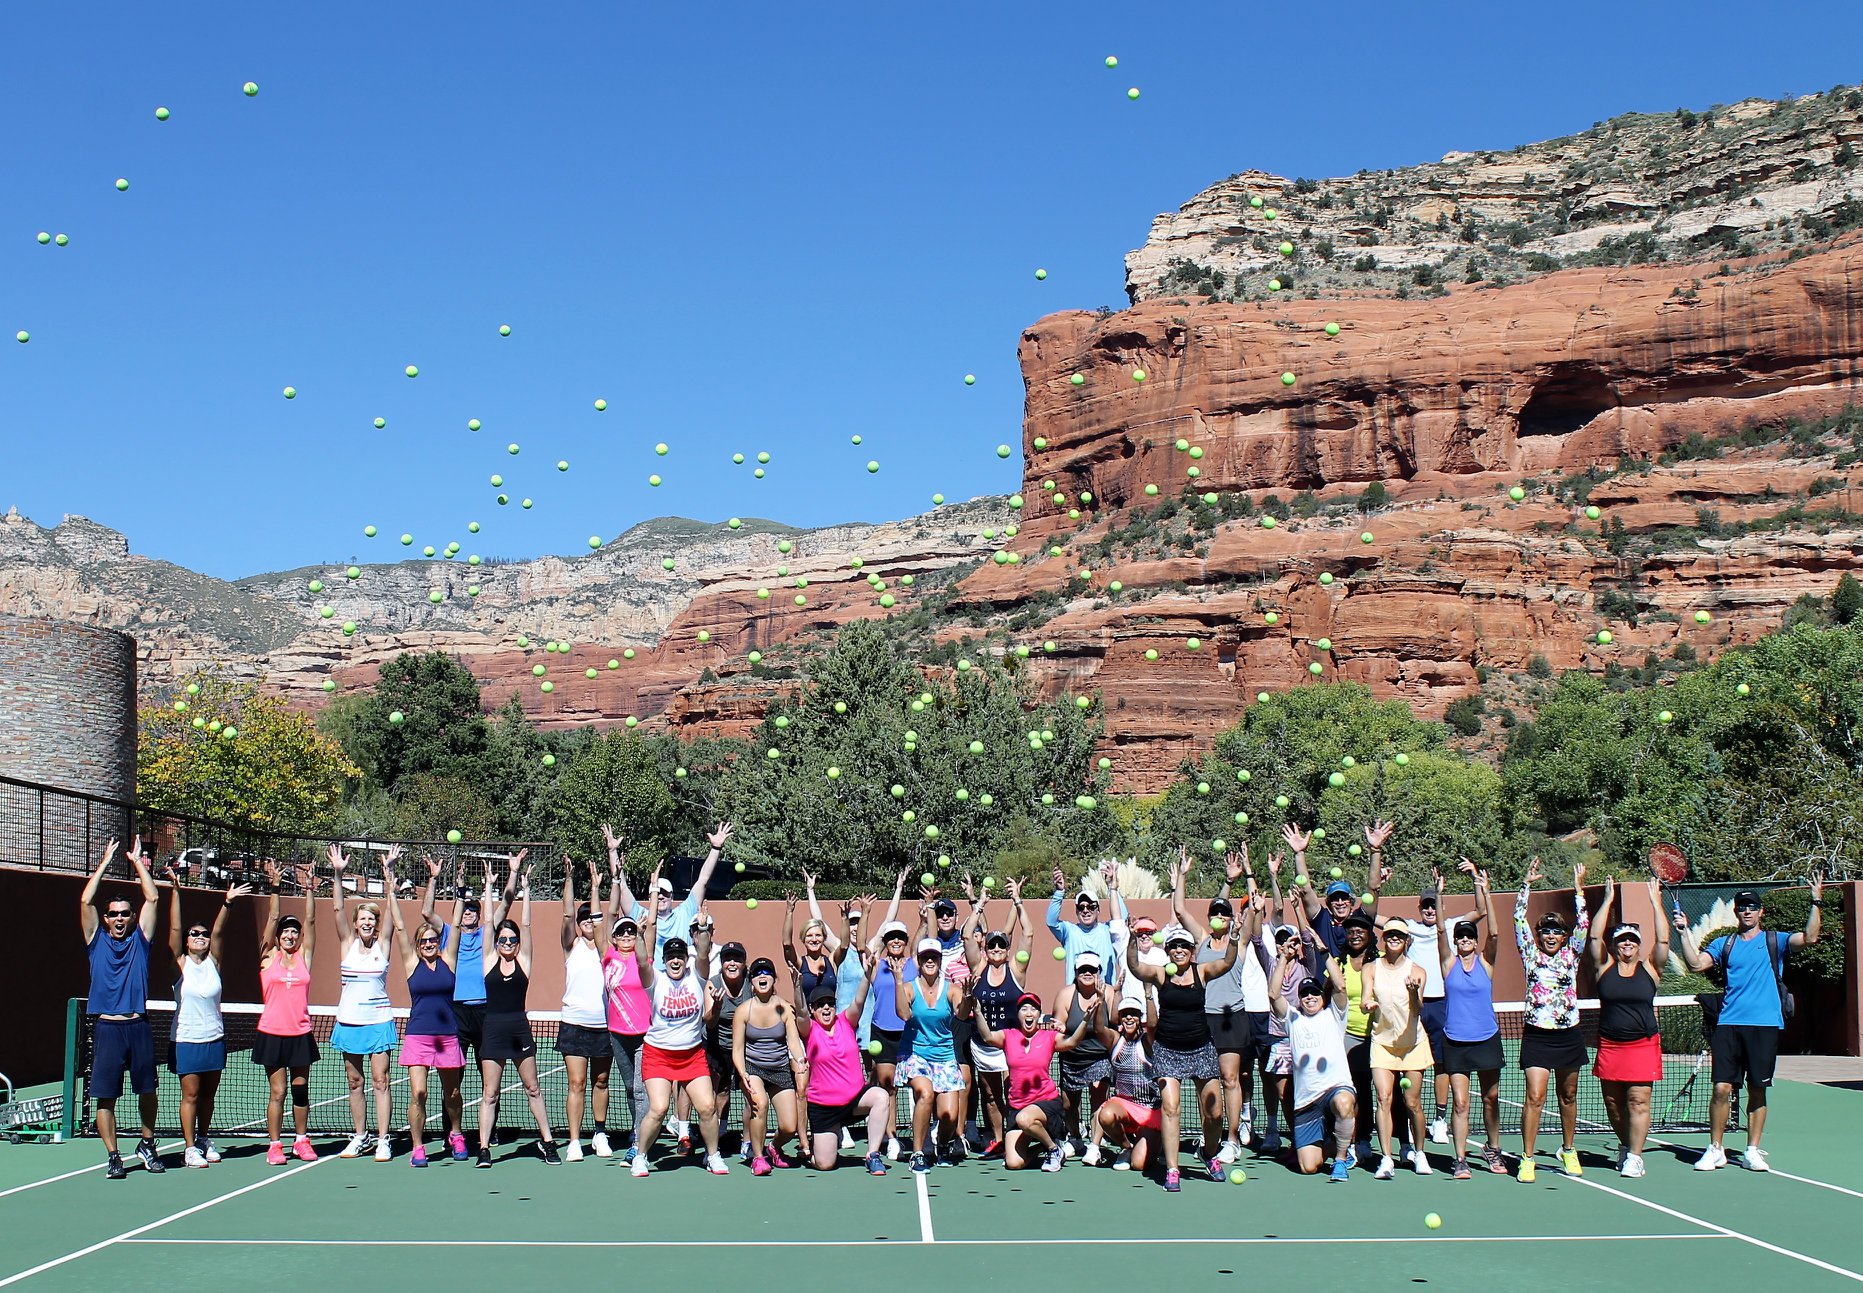 Nike Tennis Camp Group Photo on the Court